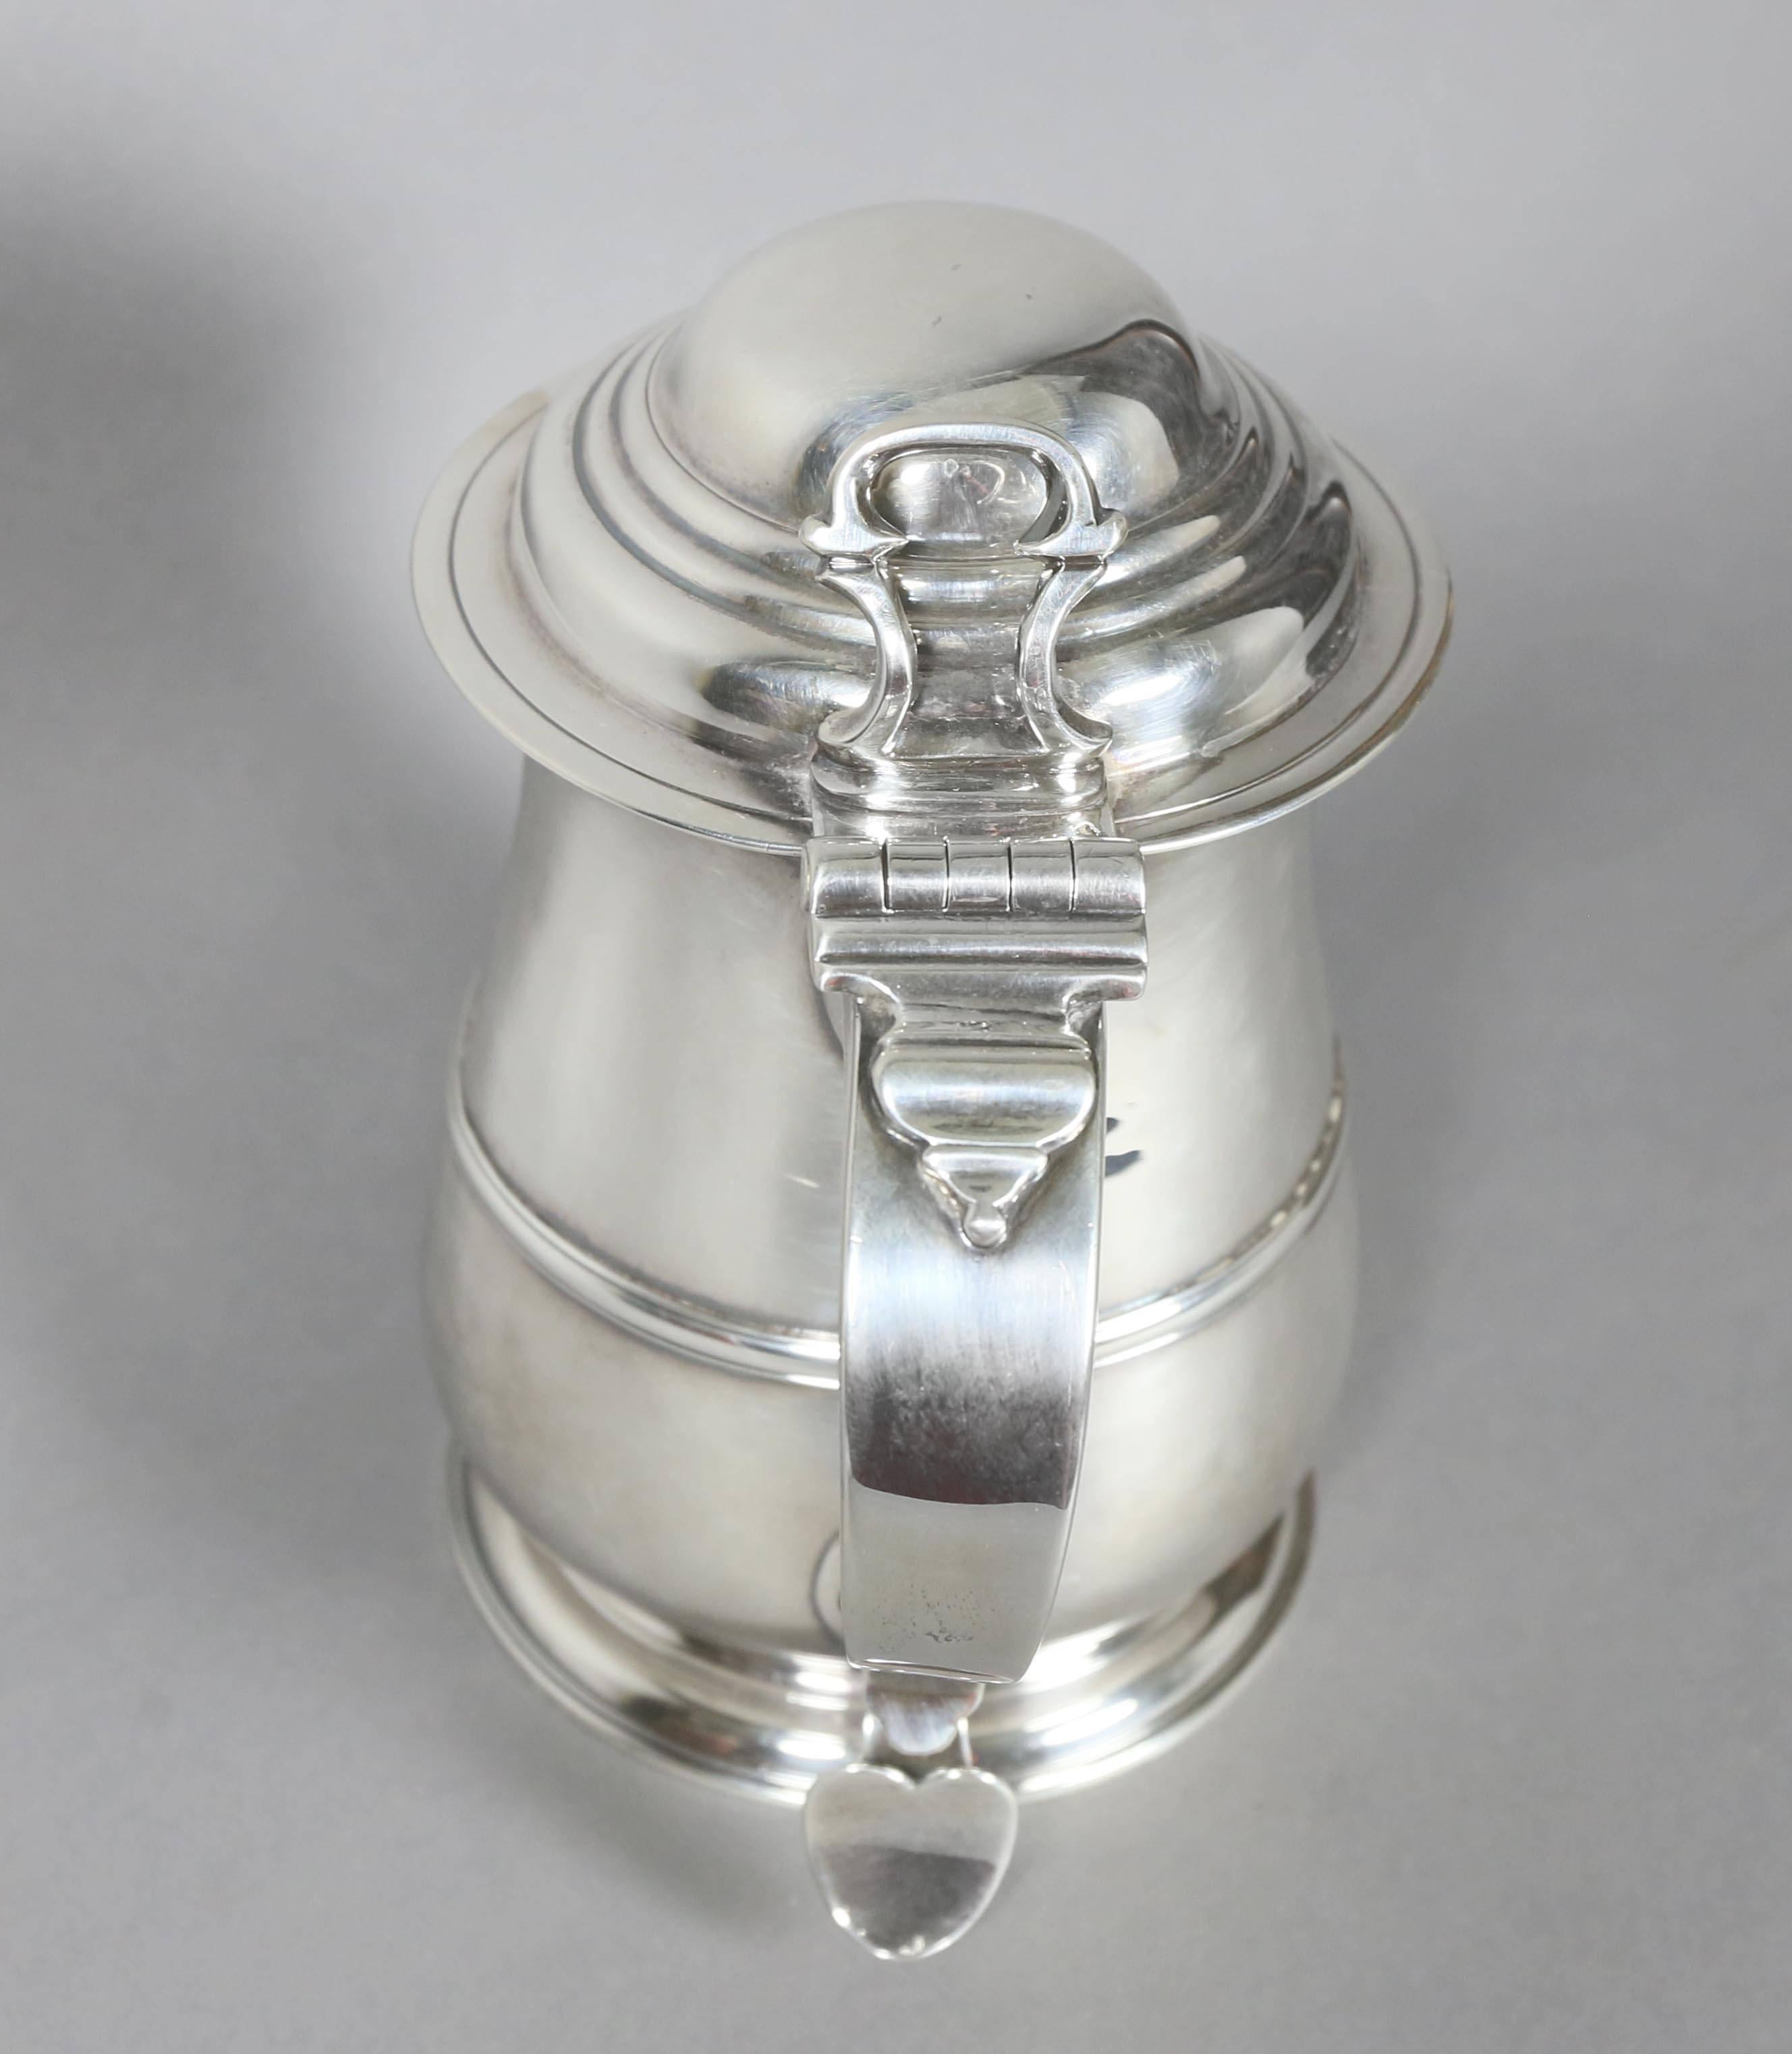 With domed hinged lid and baluster body, scroll handle. Engraved with crest.